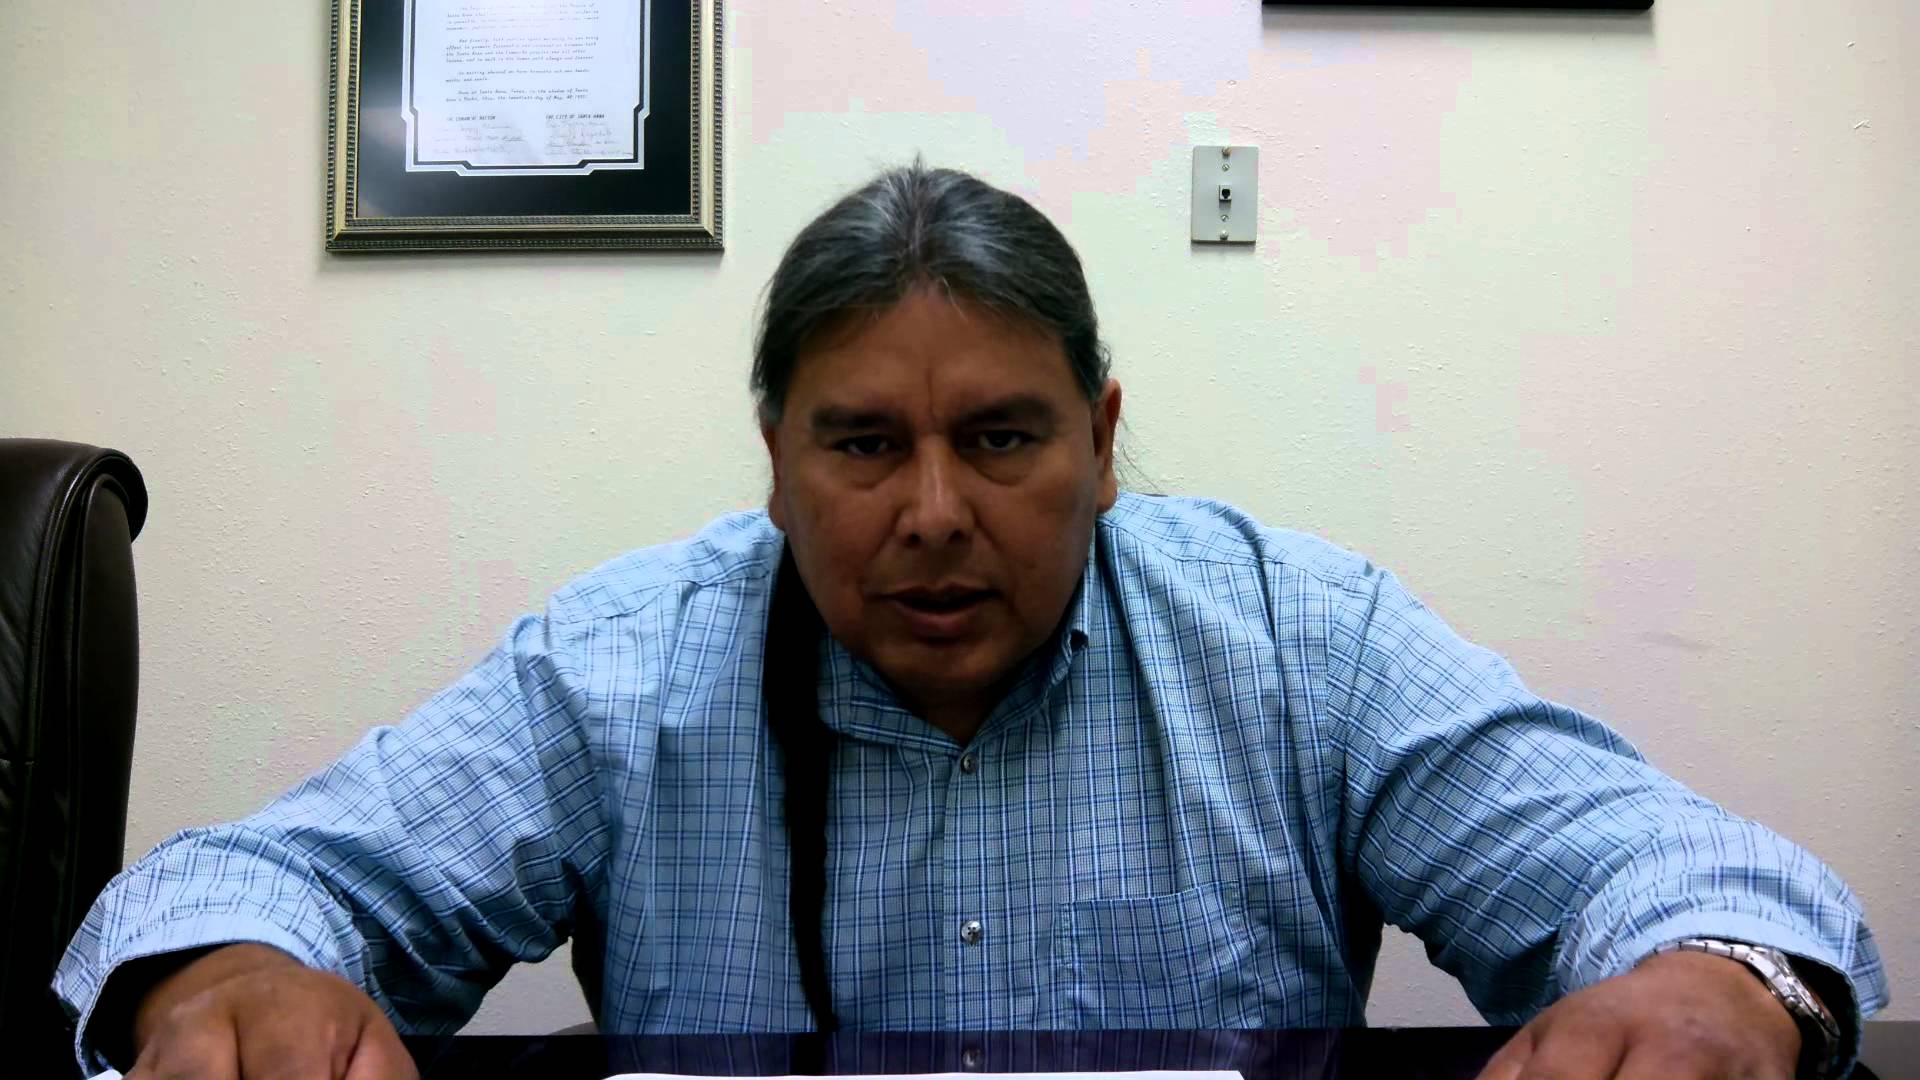 Comanche Nation schedules runoff vote over candidate's objection